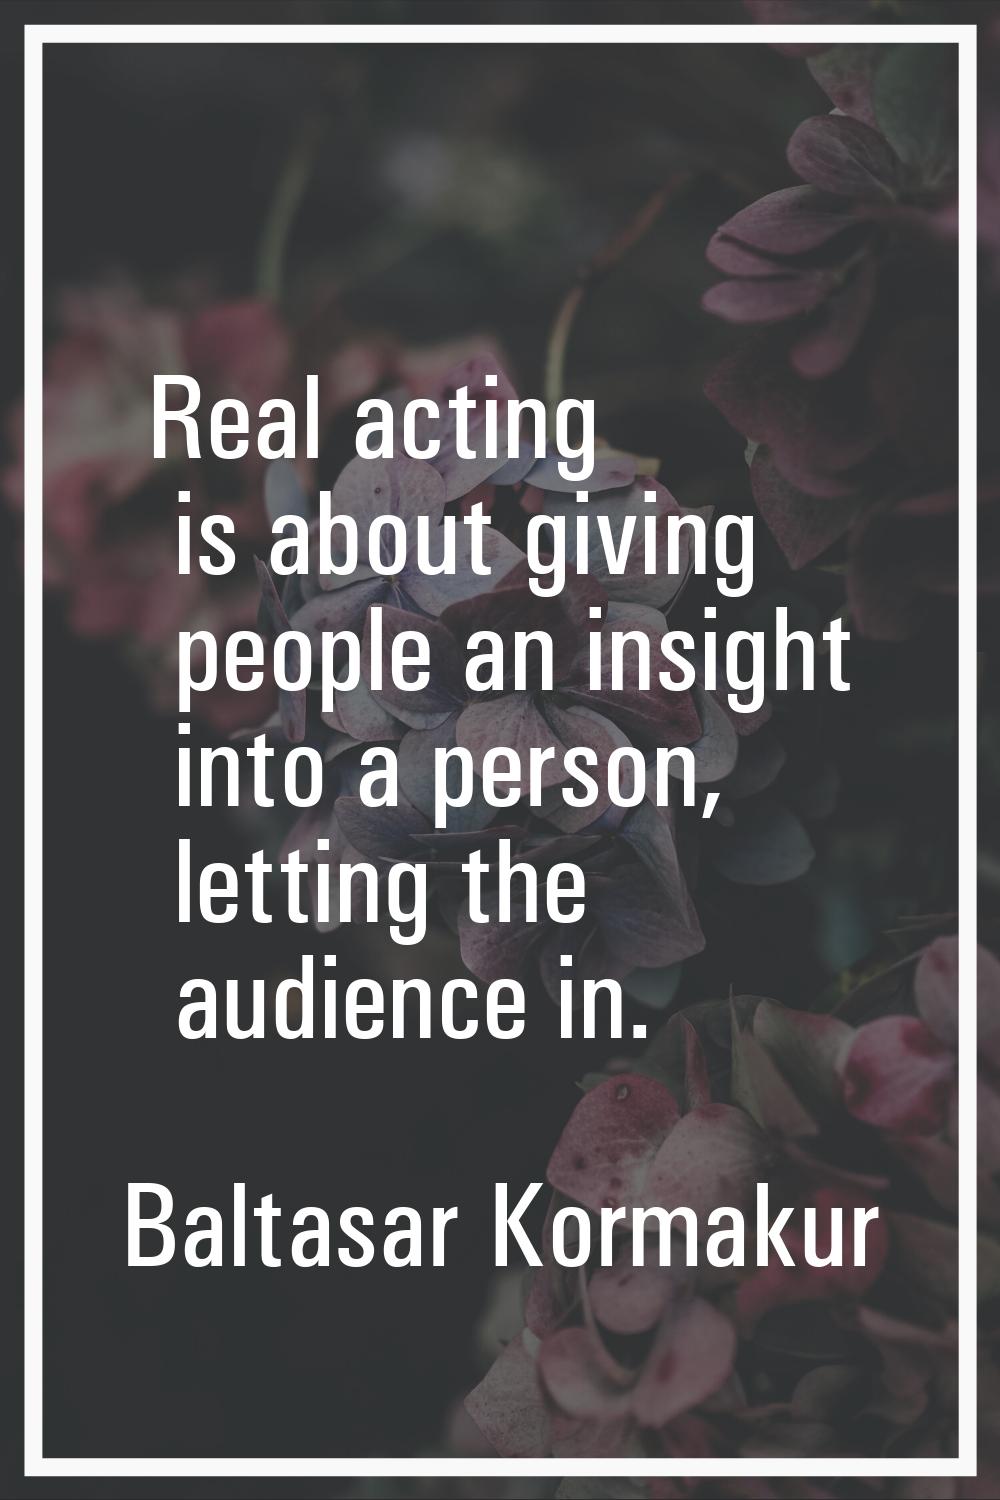 Real acting is about giving people an insight into a person, letting the audience in.